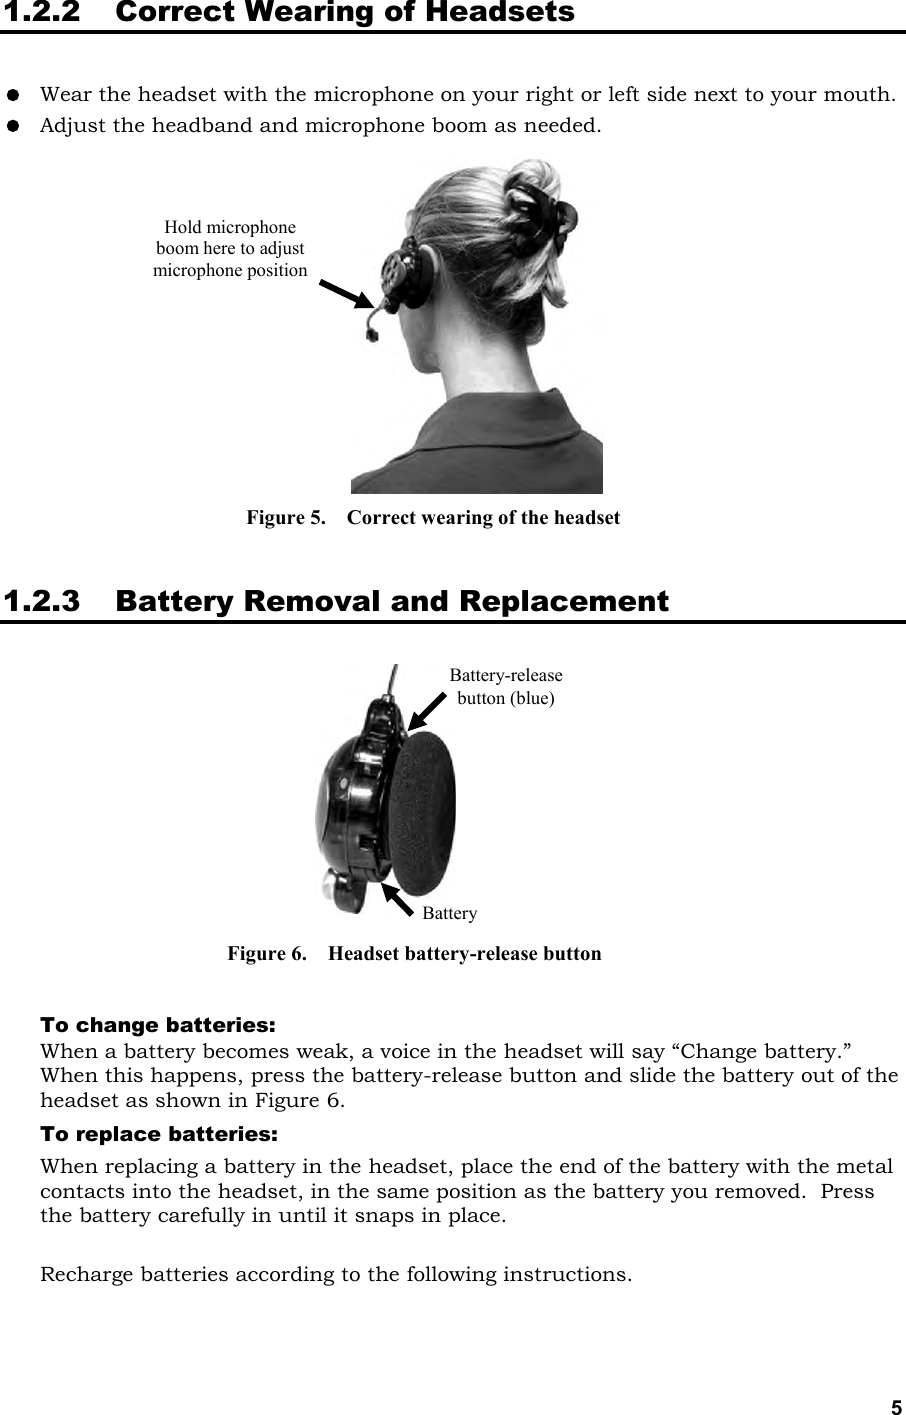   5 Battery-release button (blue) Battery 1.2.2 Correct Wearing of Headsets   Wear the headset with the microphone on your right or left side next to your mouth.  Adjust the headband and microphone boom as needed.                1.2.3 Battery Removal and Replacement             To change batteries:   When a battery becomes weak, a voice in the headset will say “Change battery.”  When this happens, press the battery-release button and slide the battery out of the headset as shown in Figure 6. To replace batteries:   When replacing a battery in the headset, place the end of the battery with the metal contacts into the headset, in the same position as the battery you removed.  Press the battery carefully in until it snaps in place.  Recharge batteries according to the following instructions. Hold microphone boom here to adjust microphone position Figure 5.    Correct wearing of the headset Figure 6.    Headset battery-release button 